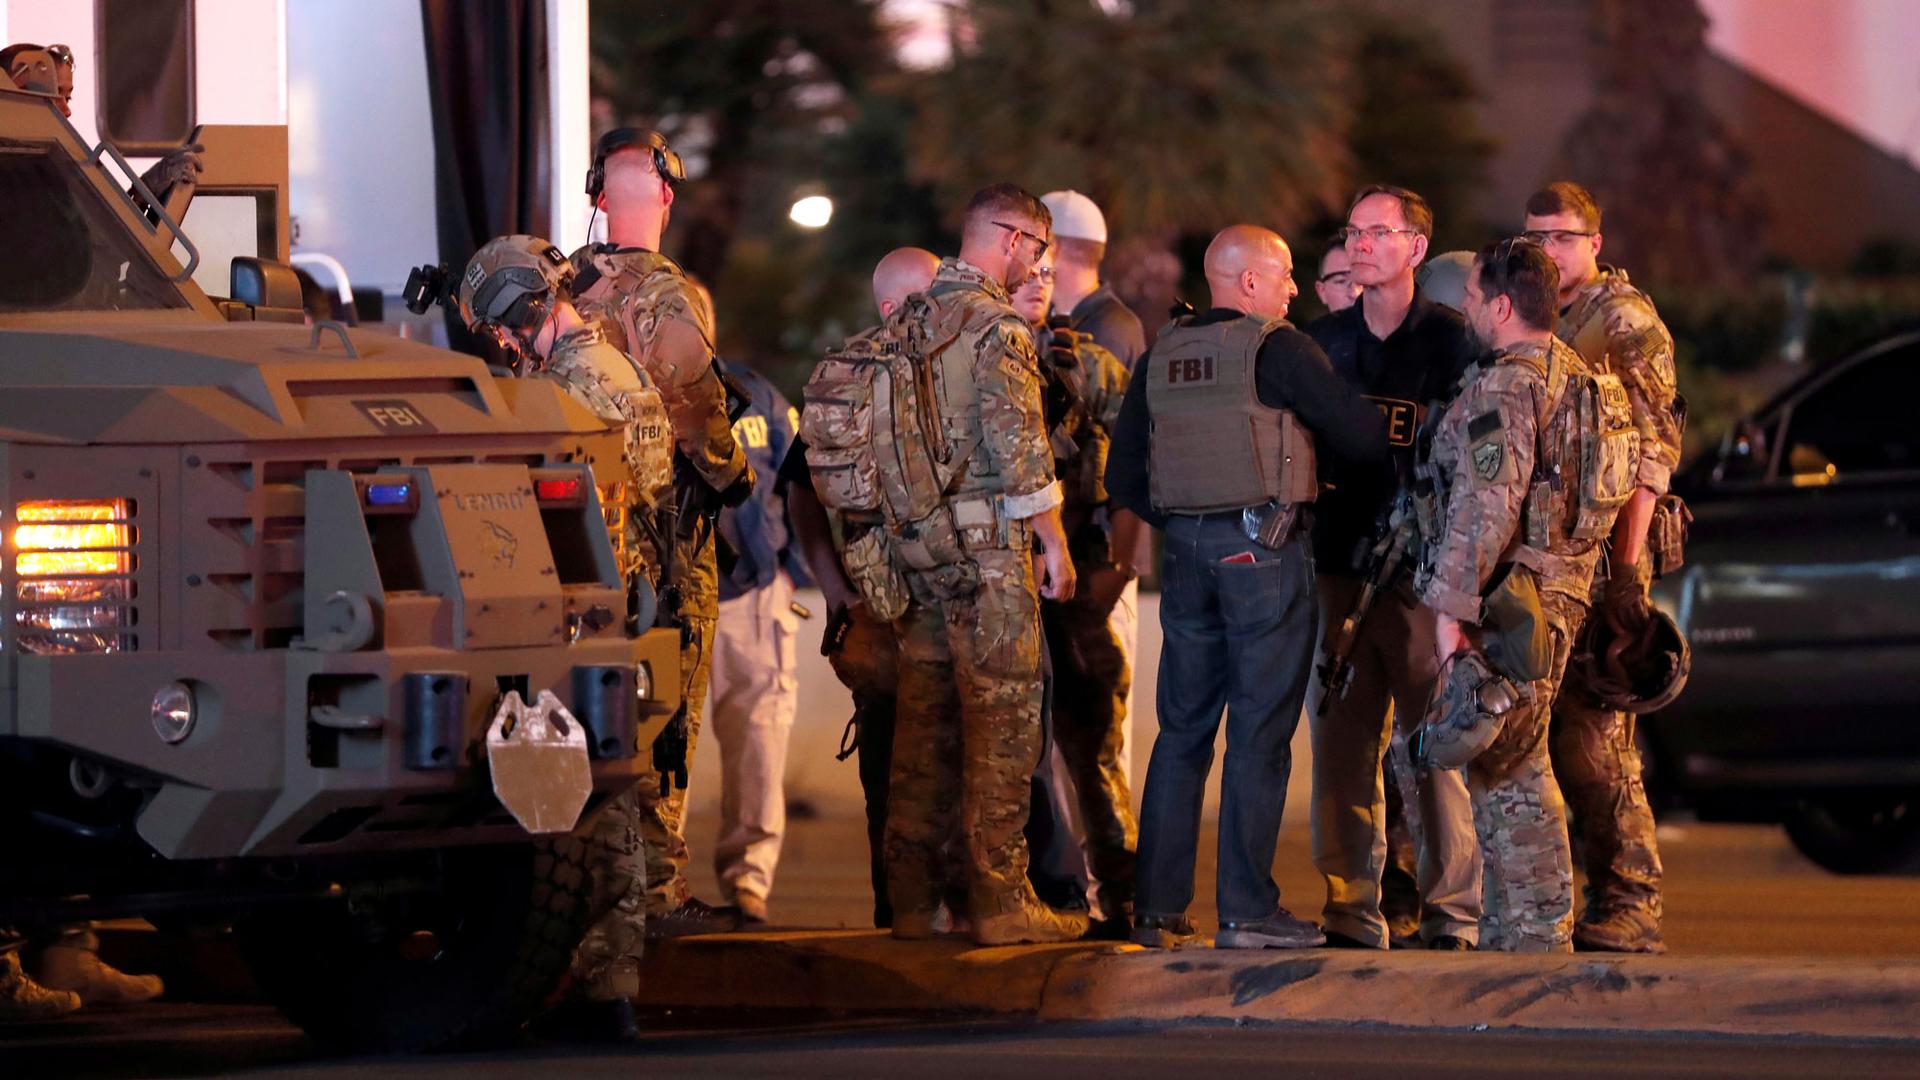 A group of men wearing camouflage clothing and FBI vests stand next to an armored car outside the Mandalay Bay Hotel in the pre-dawn light.